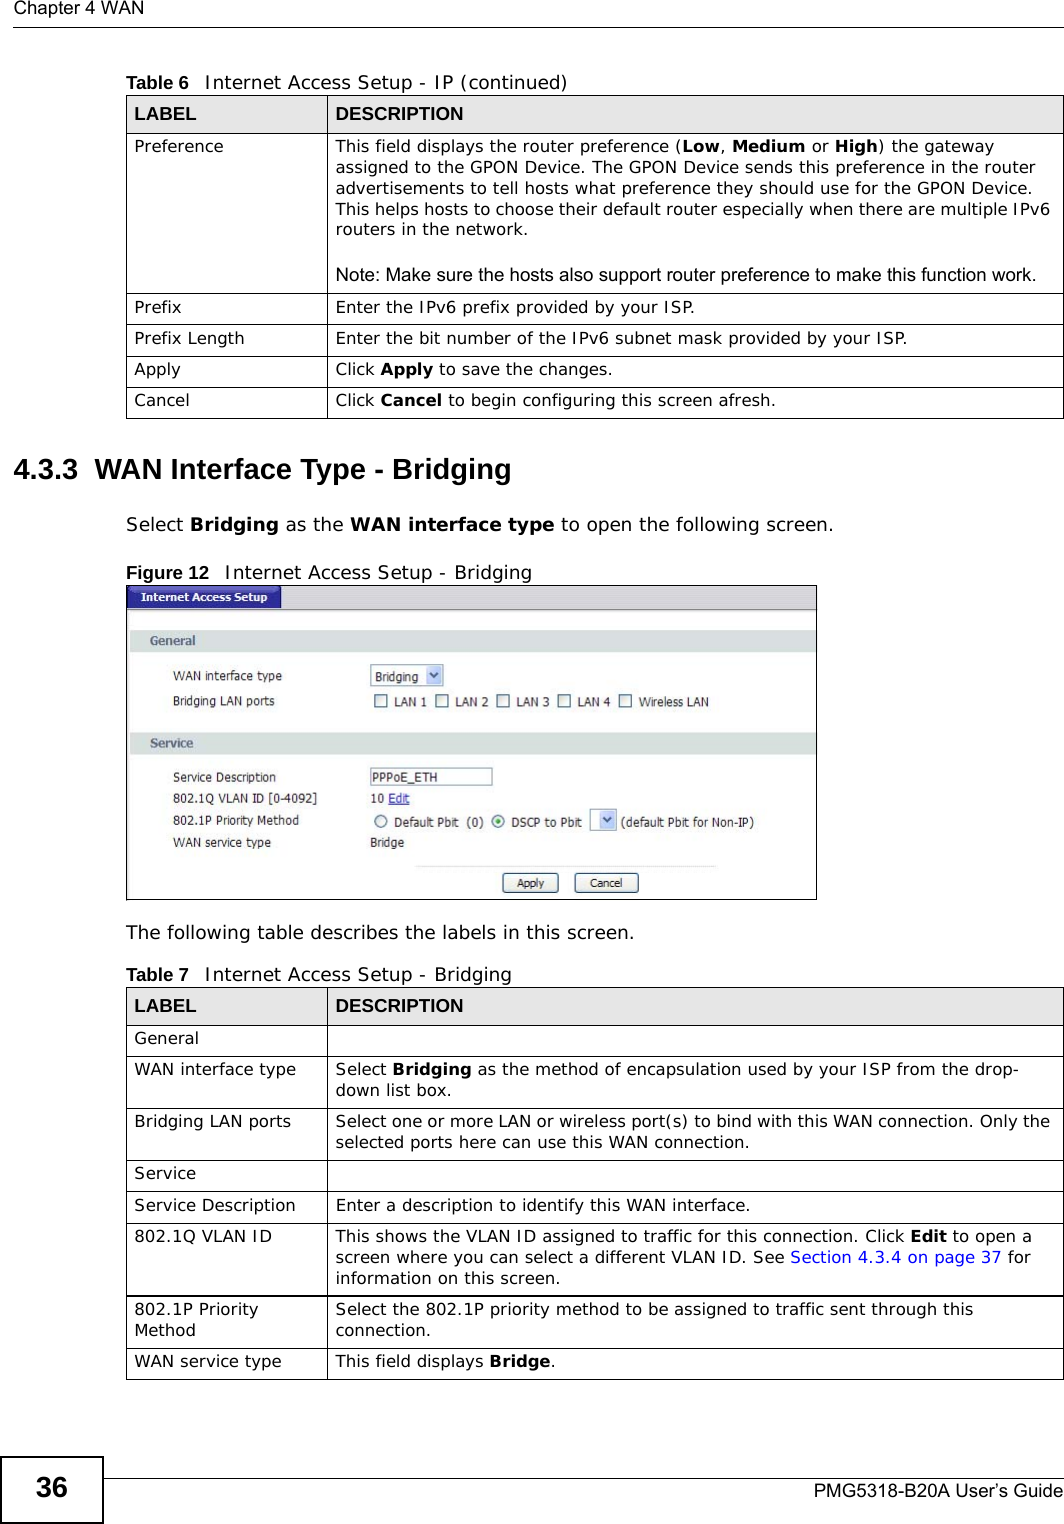 Chapter 4 WANPMG5318-B20A User’s Guide364.3.3  WAN Interface Type - BridgingSelect Bridging as the WAN interface type to open the following screen.Figure 12   Internet Access Setup - Bridging  The following table describes the labels in this screen.    Preference This field displays the router preference (Low, Medium or High) the gateway assigned to the GPON Device. The GPON Device sends this preference in the router advertisements to tell hosts what preference they should use for the GPON Device. This helps hosts to choose their default router especially when there are multiple IPv6 routers in the network.Note: Make sure the hosts also support router preference to make this function work.Prefix Enter the IPv6 prefix provided by your ISP.Prefix Length Enter the bit number of the IPv6 subnet mask provided by your ISP.Apply Click Apply to save the changes. Cancel Click Cancel to begin configuring this screen afresh.Table 6   Internet Access Setup - IP (continued)LABEL DESCRIPTIONTable 7   Internet Access Setup - BridgingLABEL DESCRIPTIONGeneralWAN interface type Select Bridging as the method of encapsulation used by your ISP from the drop-down list box.Bridging LAN ports Select one or more LAN or wireless port(s) to bind with this WAN connection. Only the selected ports here can use this WAN connection. ServiceService Description Enter a description to identify this WAN interface.802.1Q VLAN ID This shows the VLAN ID assigned to traffic for this connection. Click Edit to open a screen where you can select a different VLAN ID. See Section 4.3.4 on page 37 for information on this screen.802.1P Priority Method Select the 802.1P priority method to be assigned to traffic sent through this connection.WAN service type This field displays Bridge.